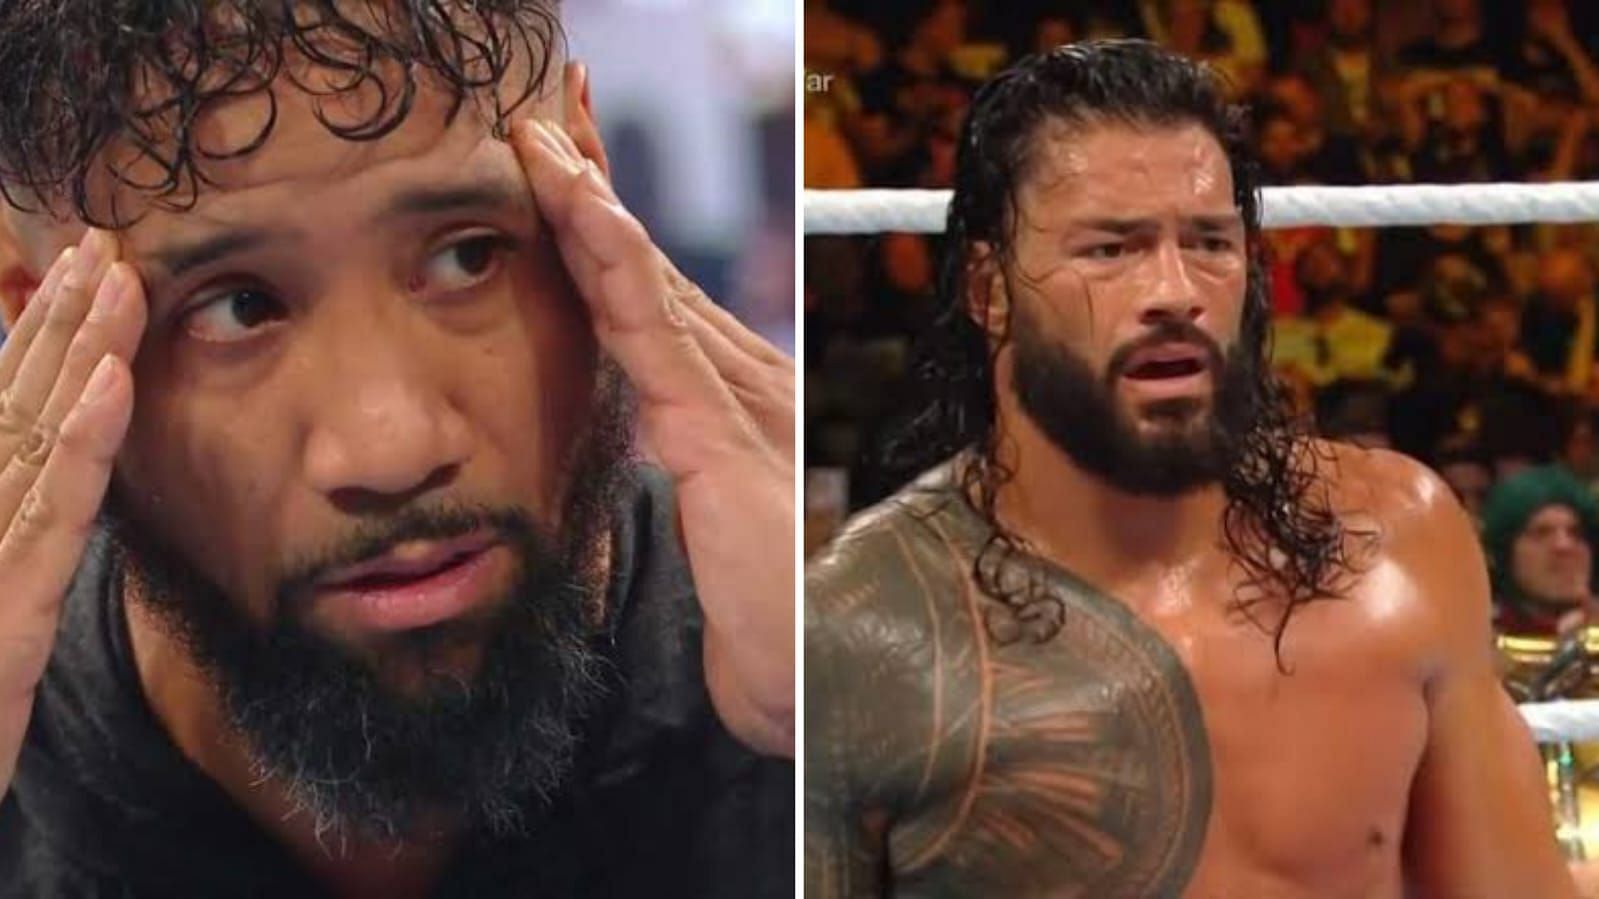 Roman Reigns and Jey Uso could soon collide at SummerSlam 2023.